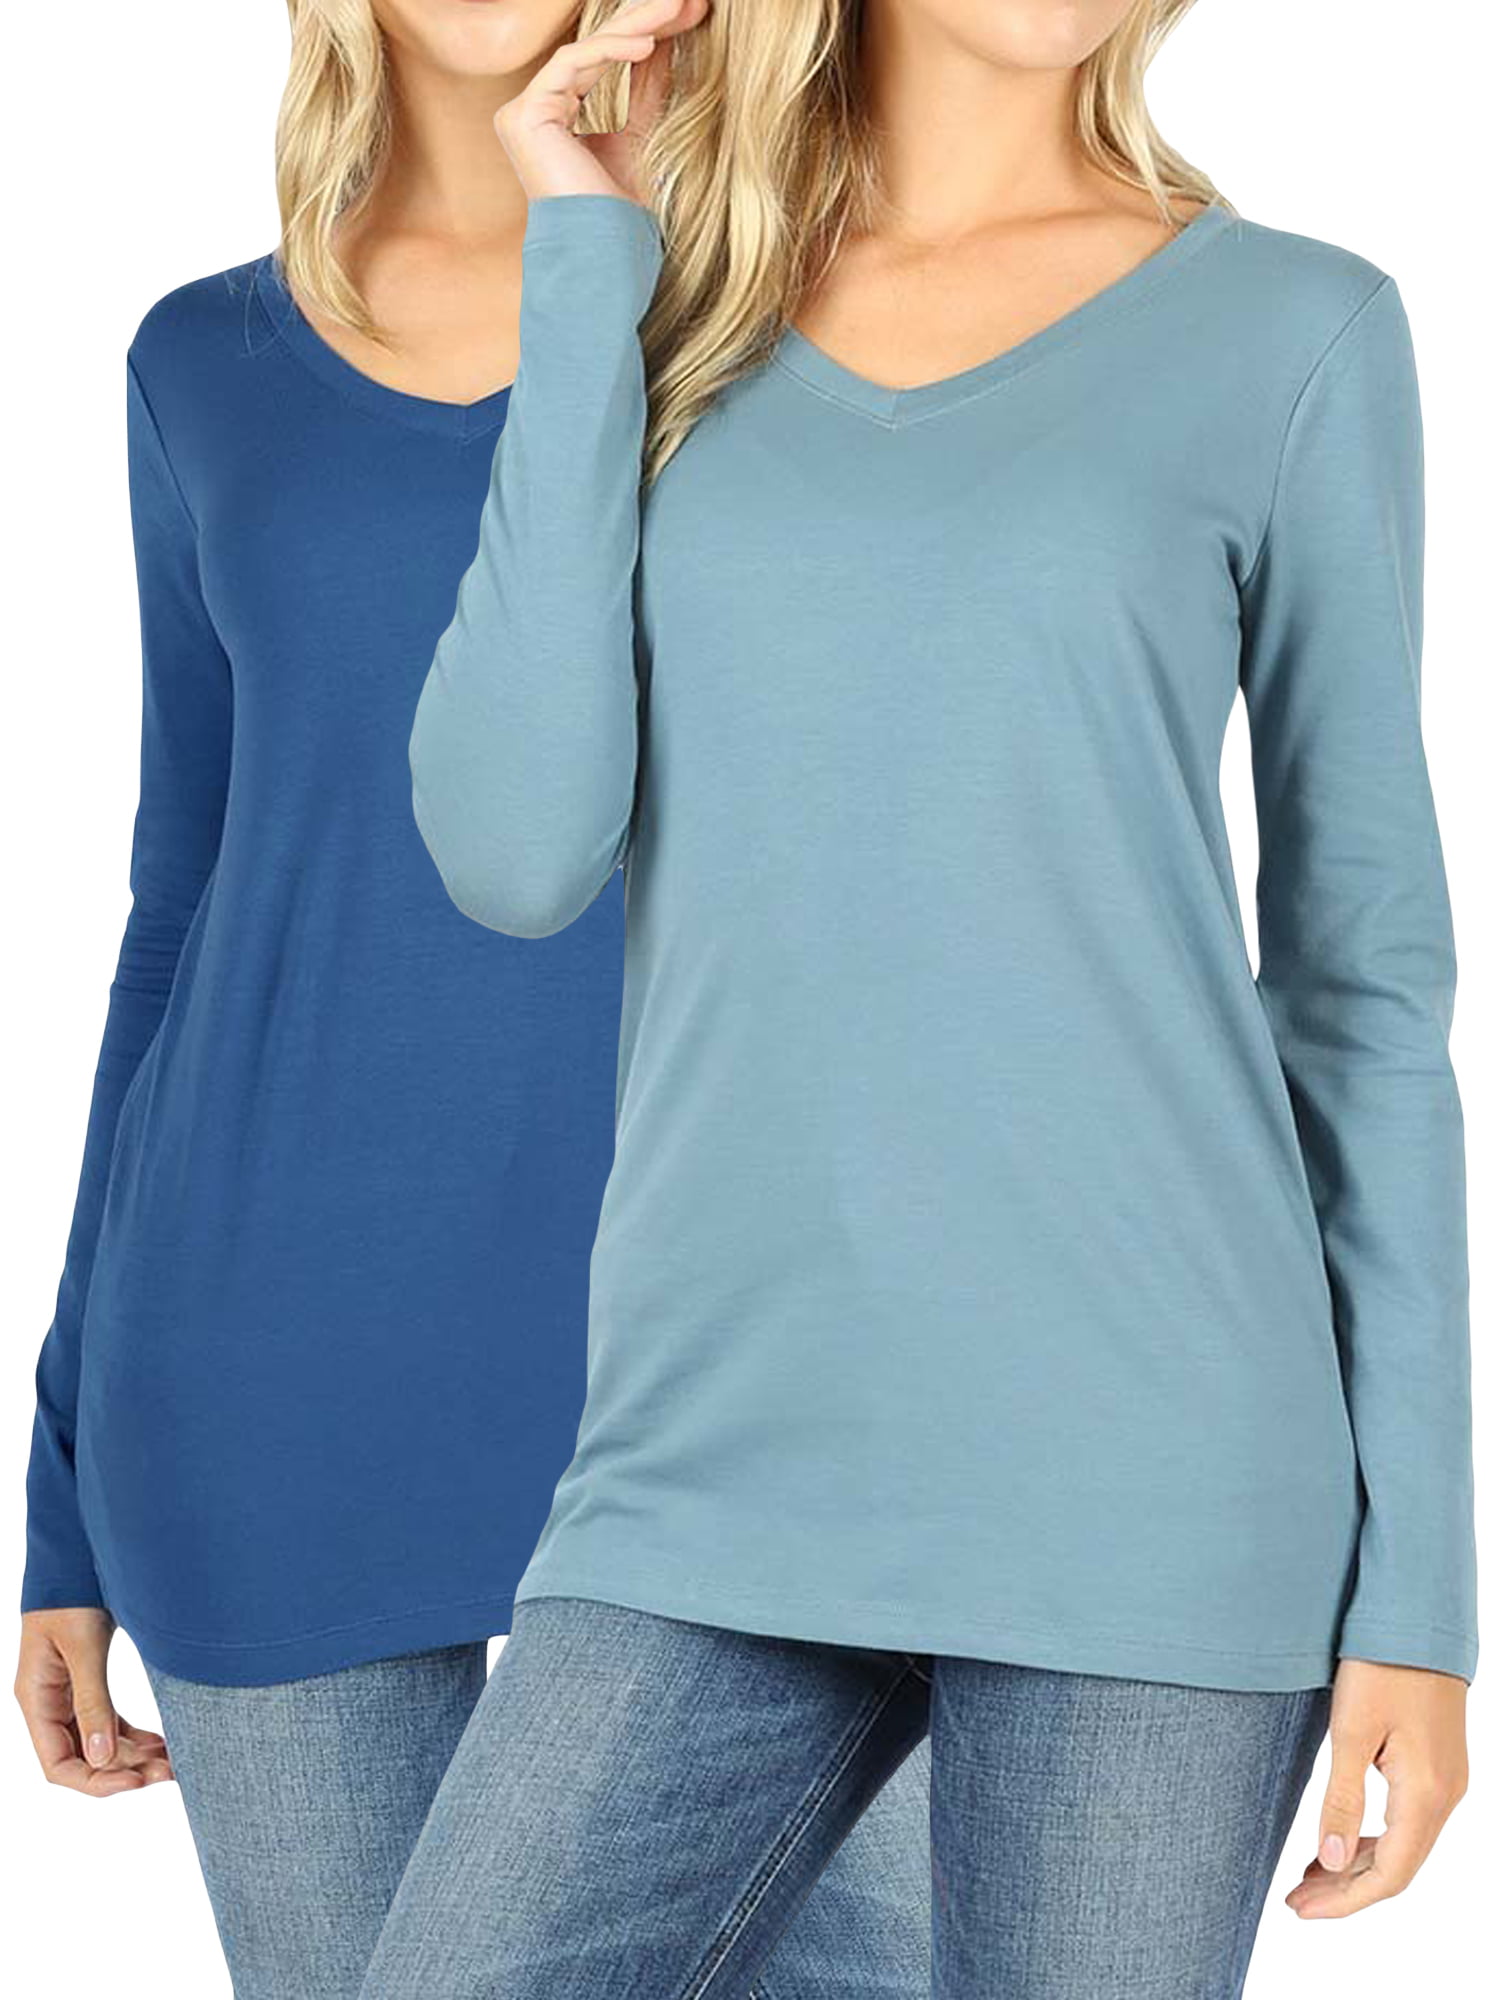 Women Basic Cotton Relaxed Fit V-Neck(S-3X) Long Sleeve T-Shirt Top ...